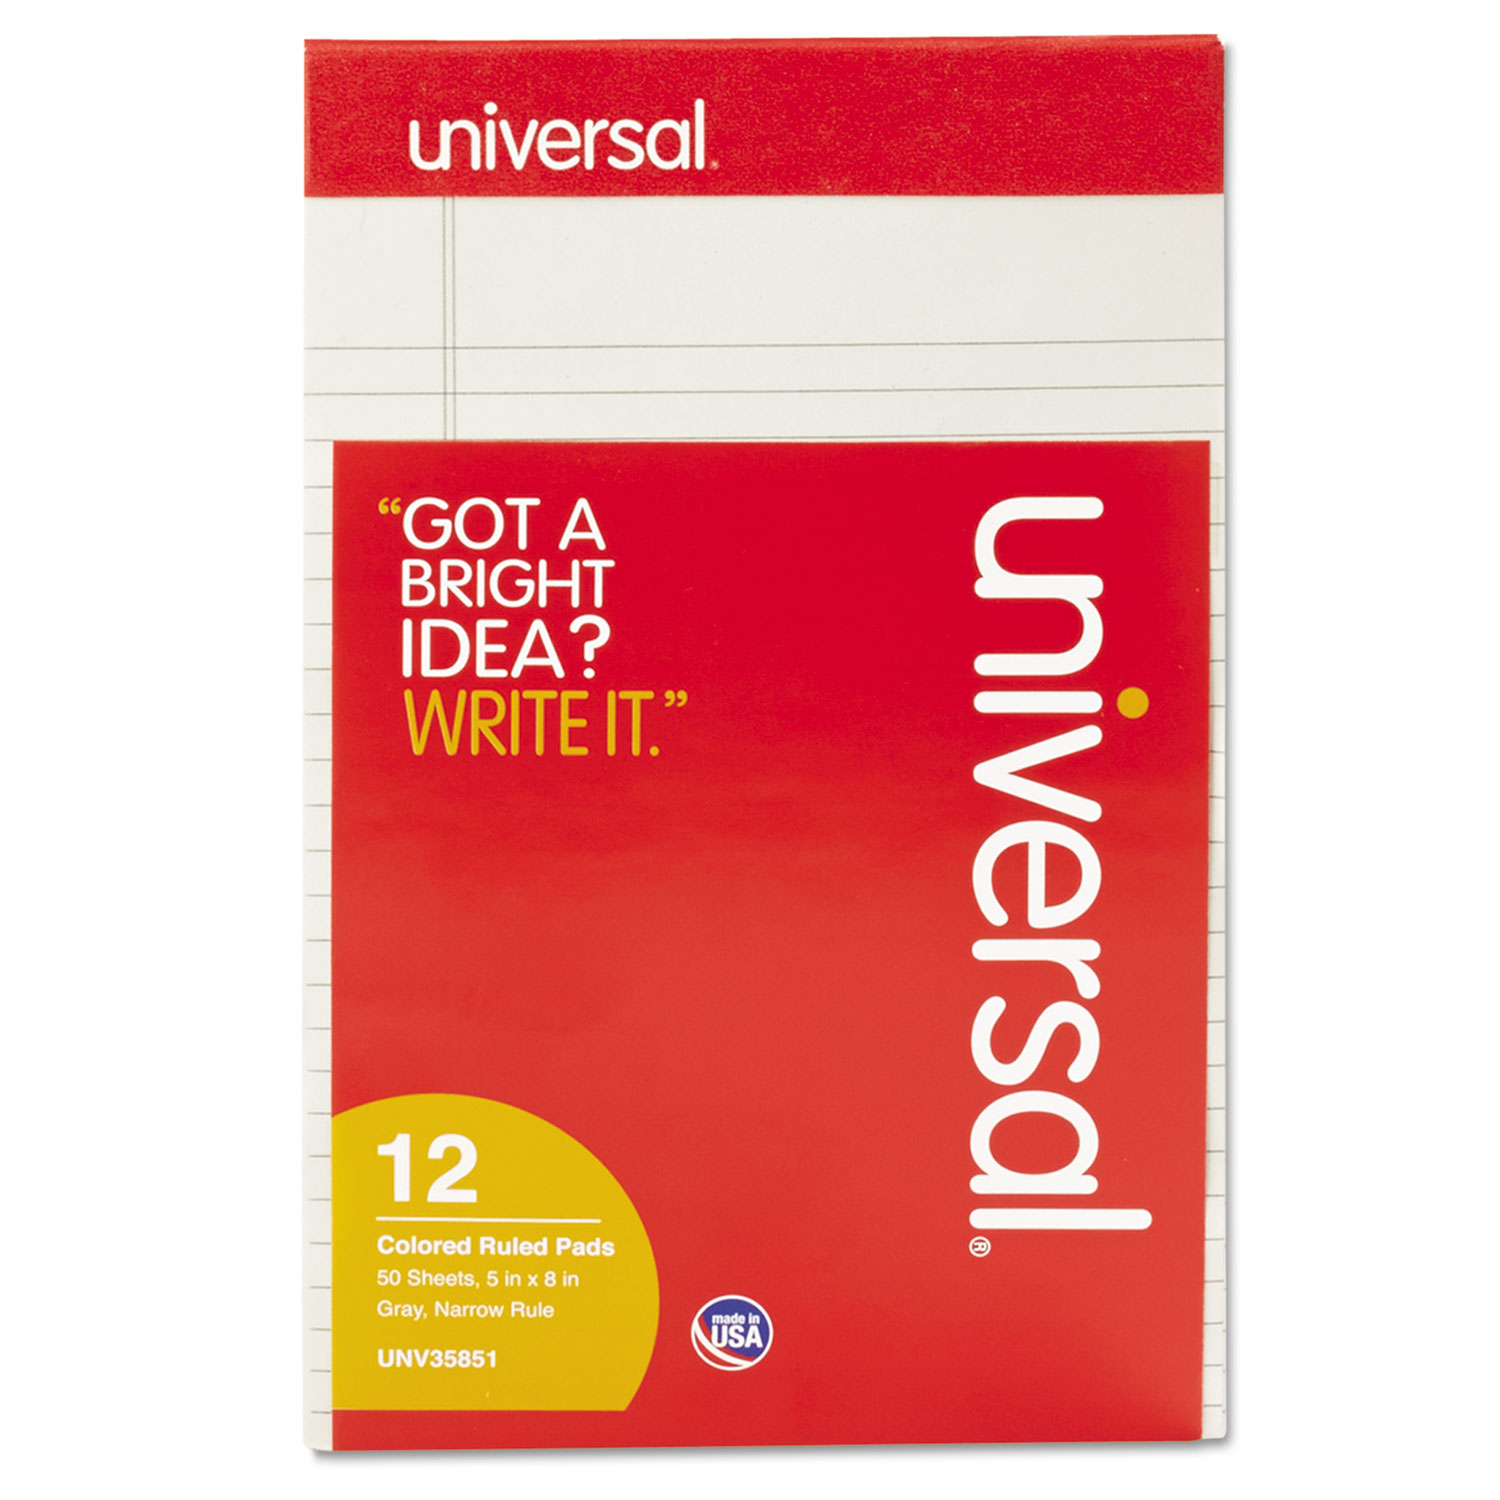  Universal UNV35851 Colored Perforated Writing Pads, Narrow Rule, 5 x 8, Gray, 50 Sheets, Dozen (UNV35851) 